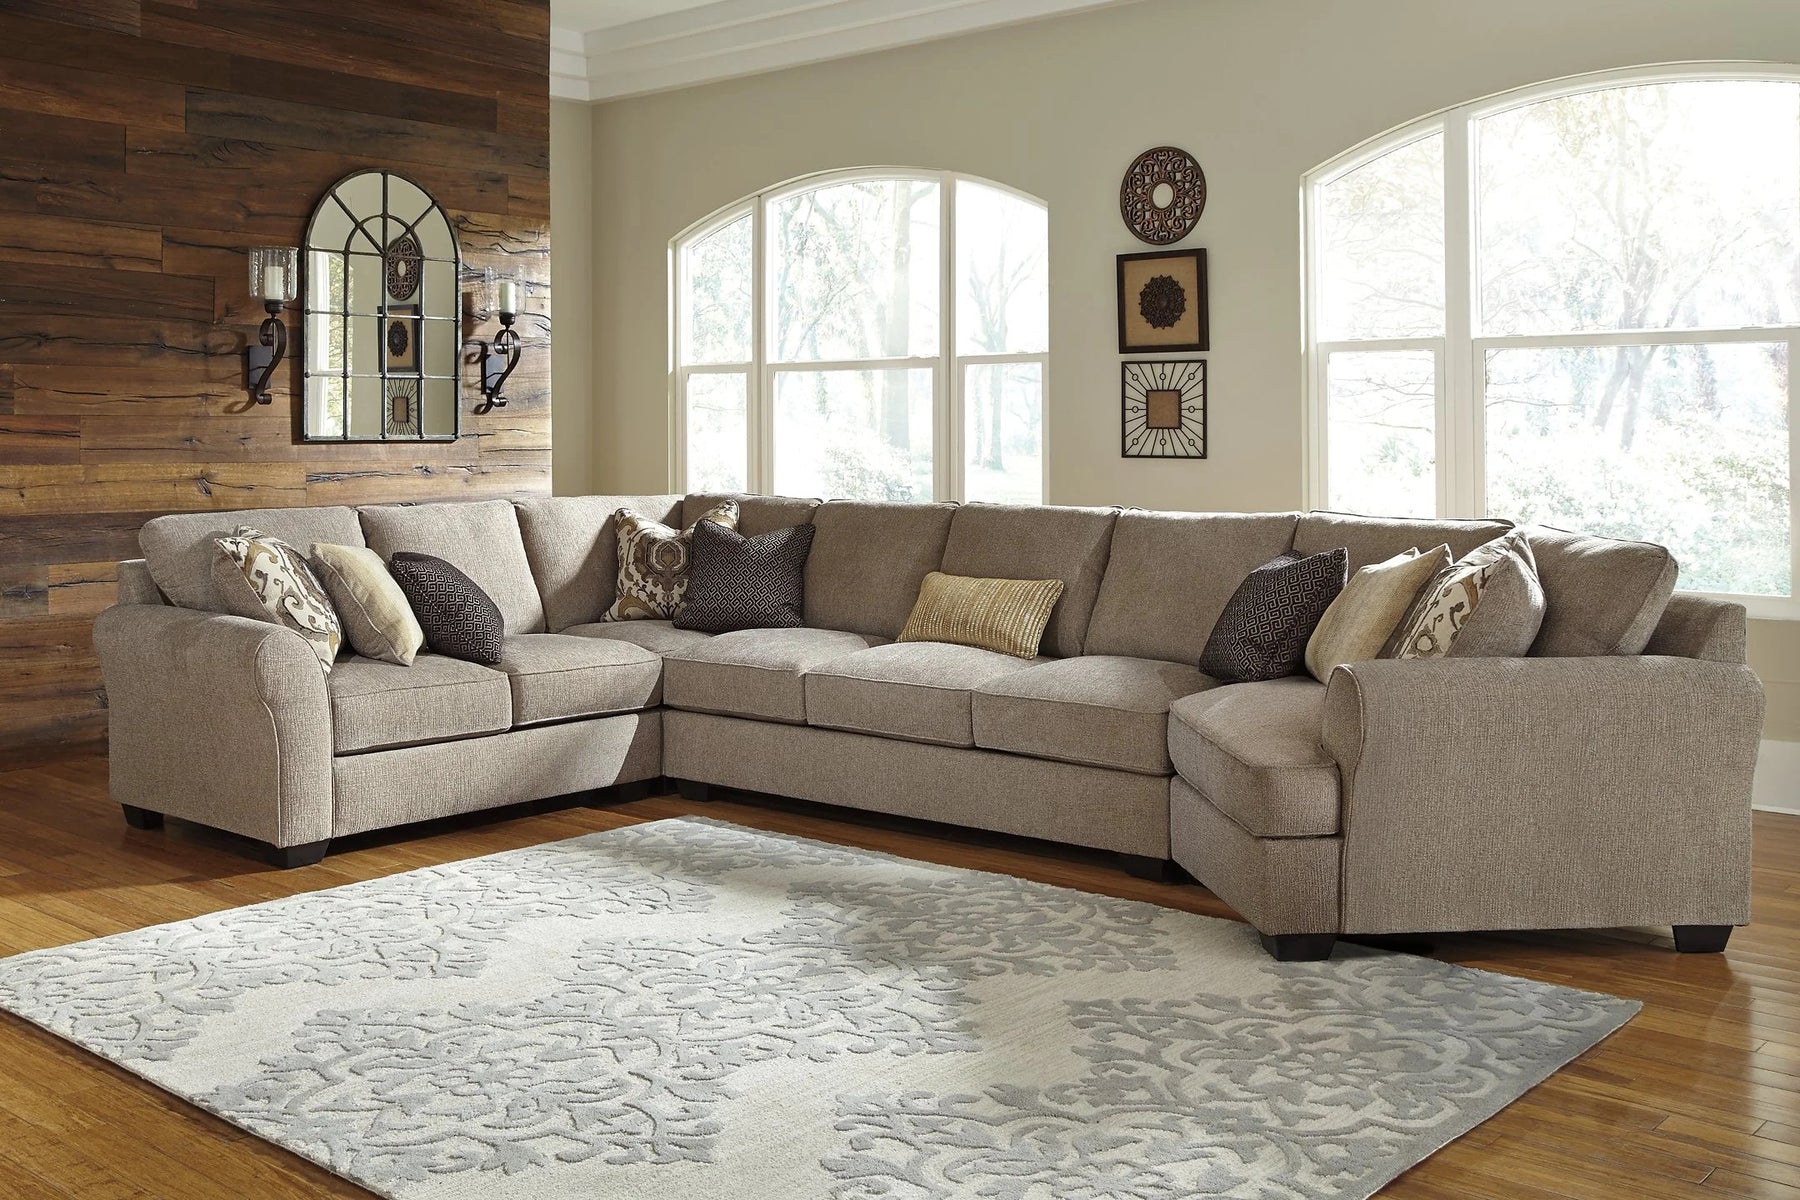 Factors-to-Consider-When-Choosing-a-Sectional-Sofa Dayton Discount Furniture